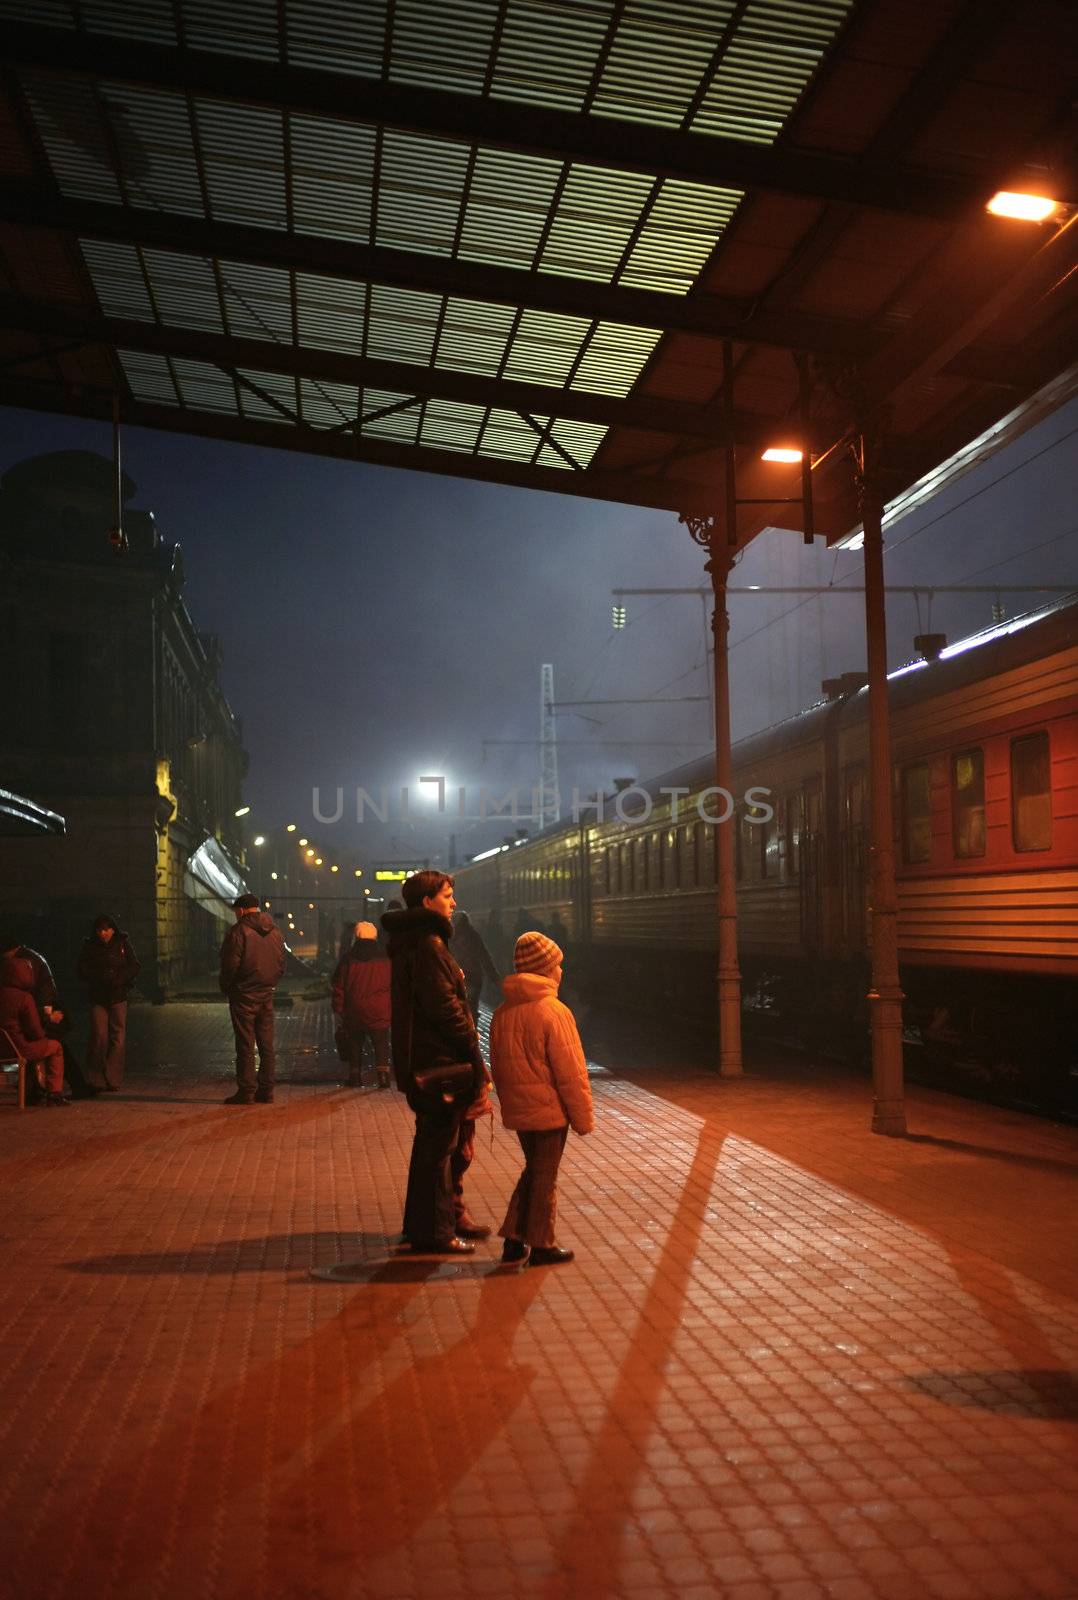 The image of station with people at night